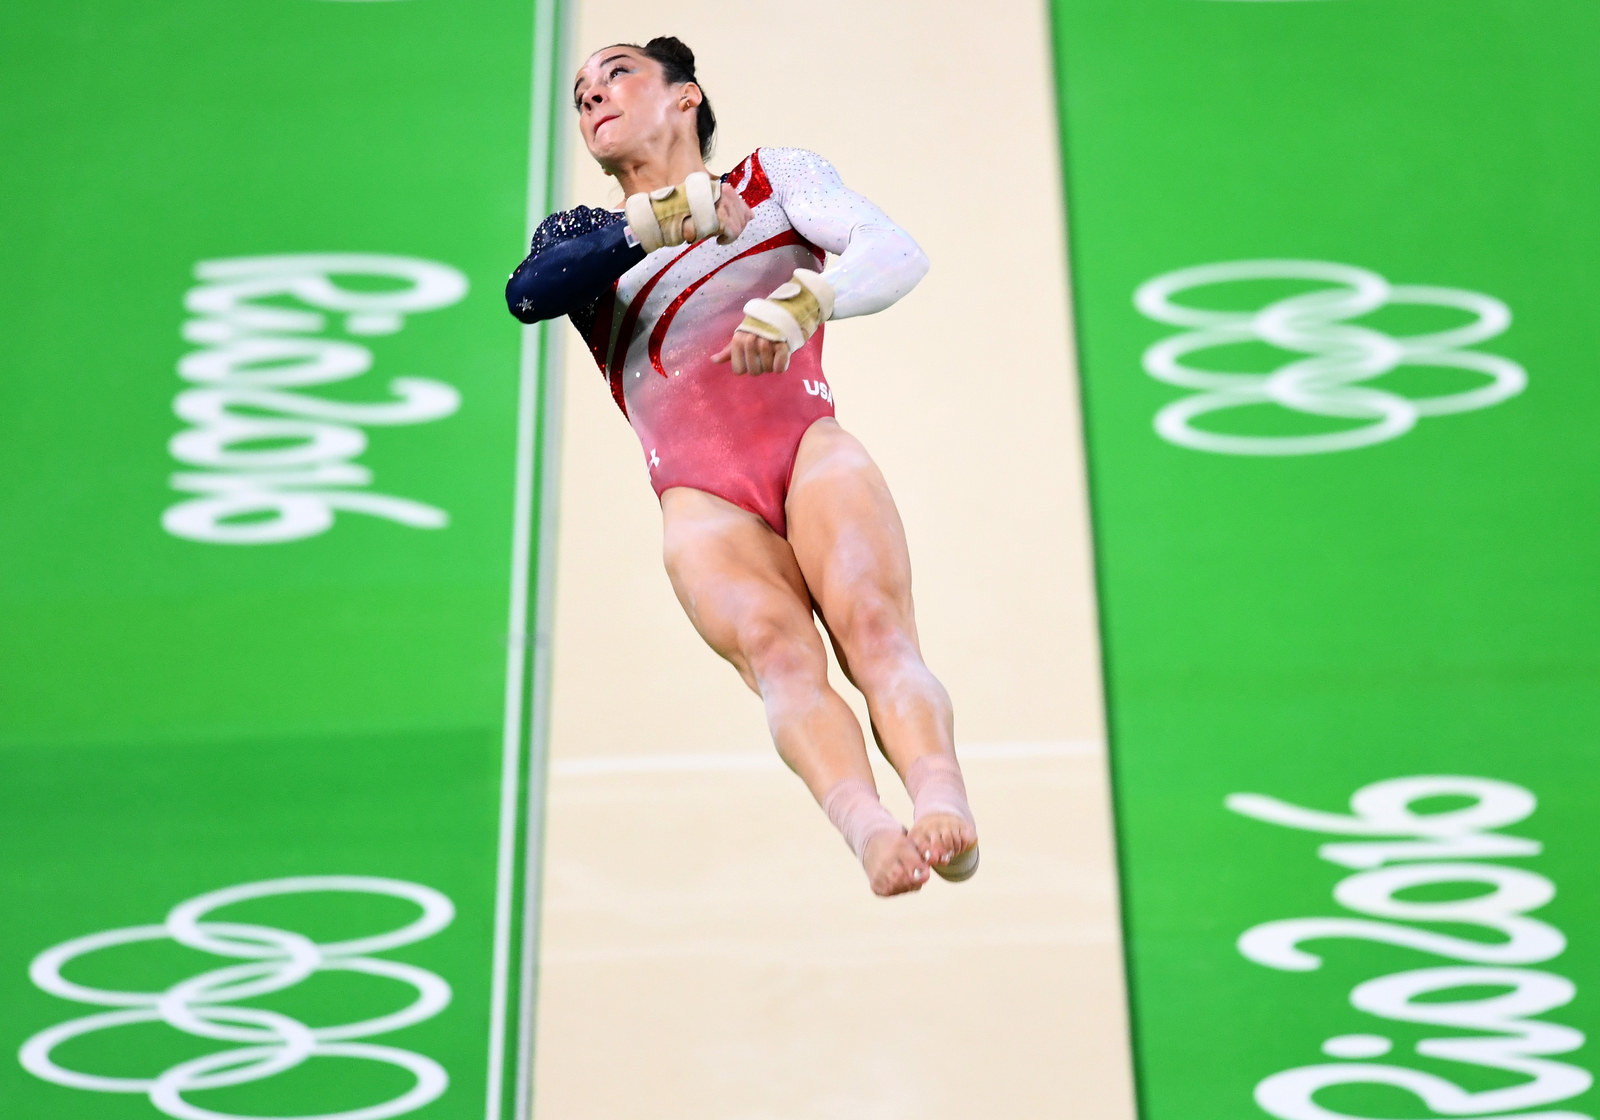 The Us Womens Gymnastics Team Wins Gold After A Gravity Defying Performance 